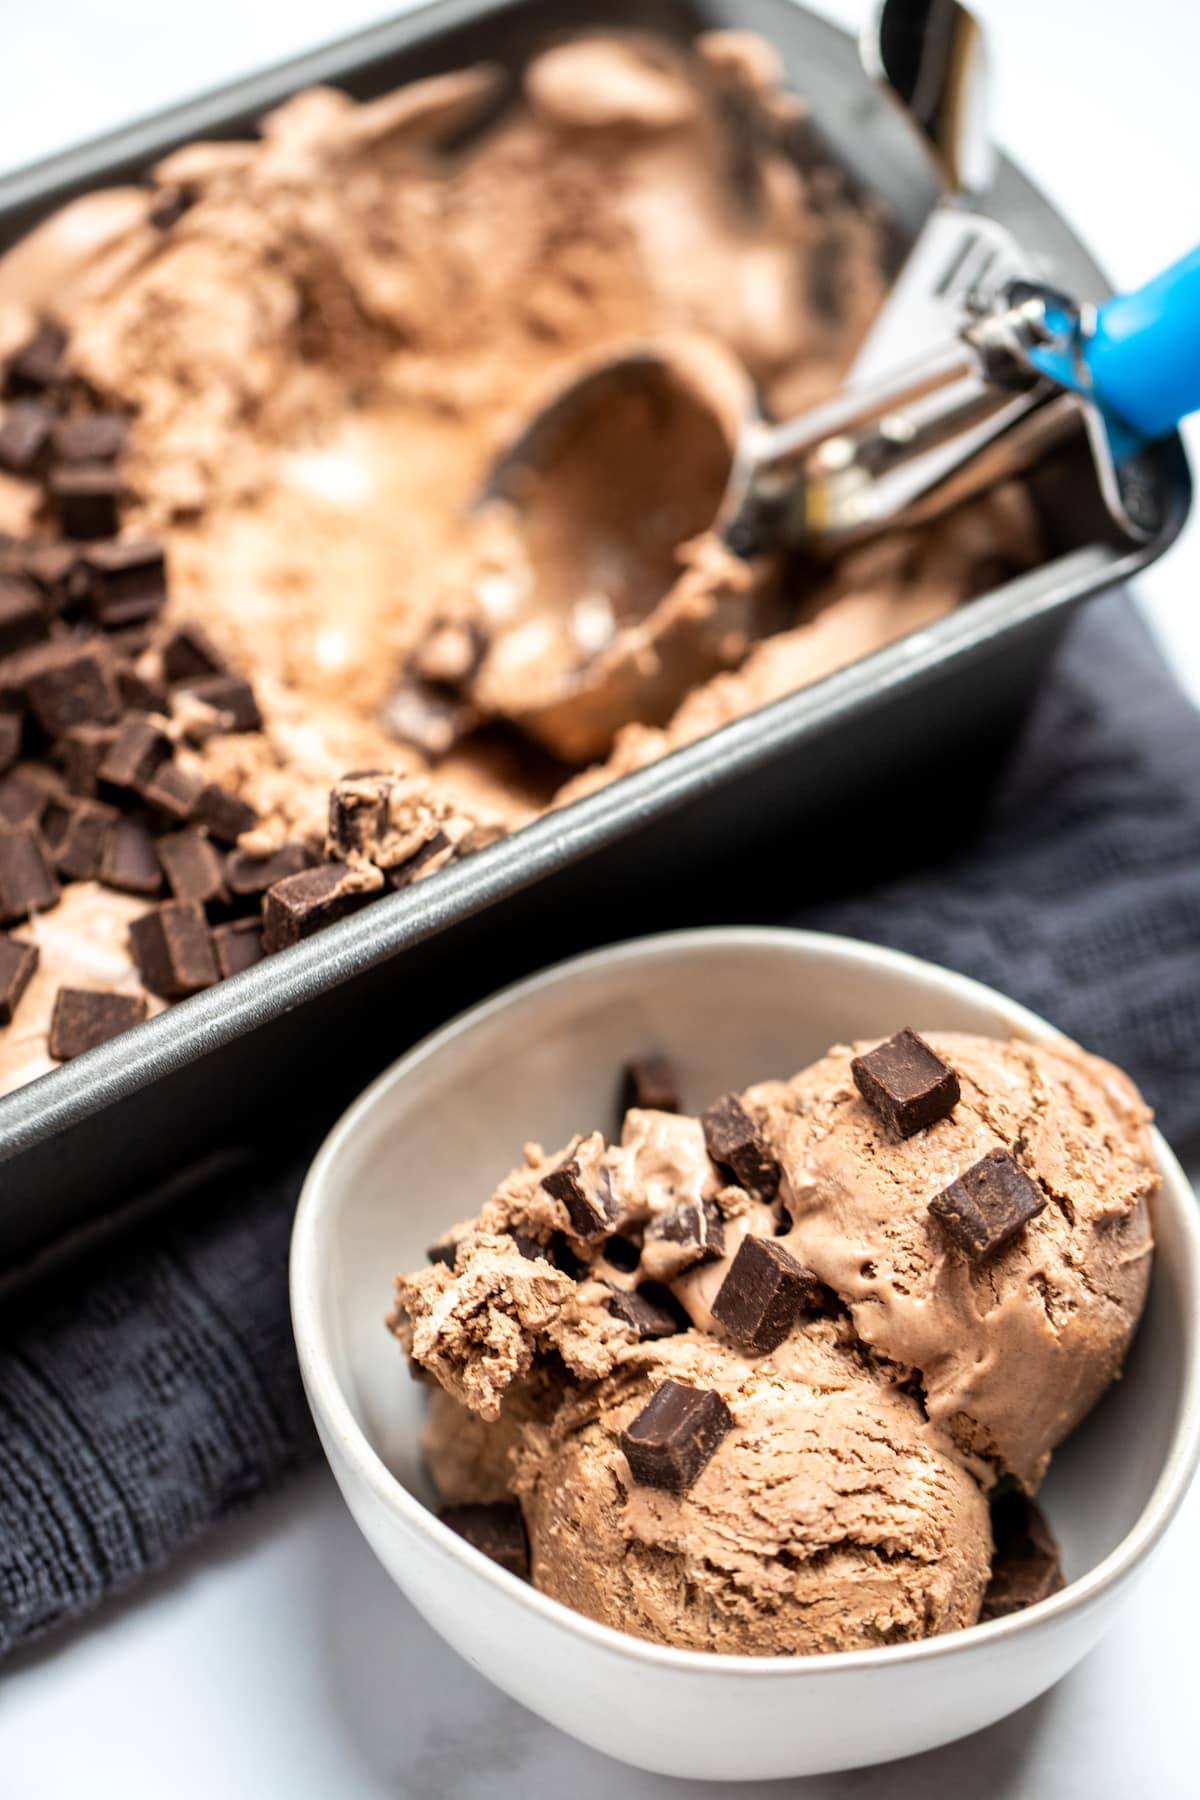 A bowl if chocolate ice cream topped with chocolate chunks next to a bread pan of ice cream with an ice cream scoop.